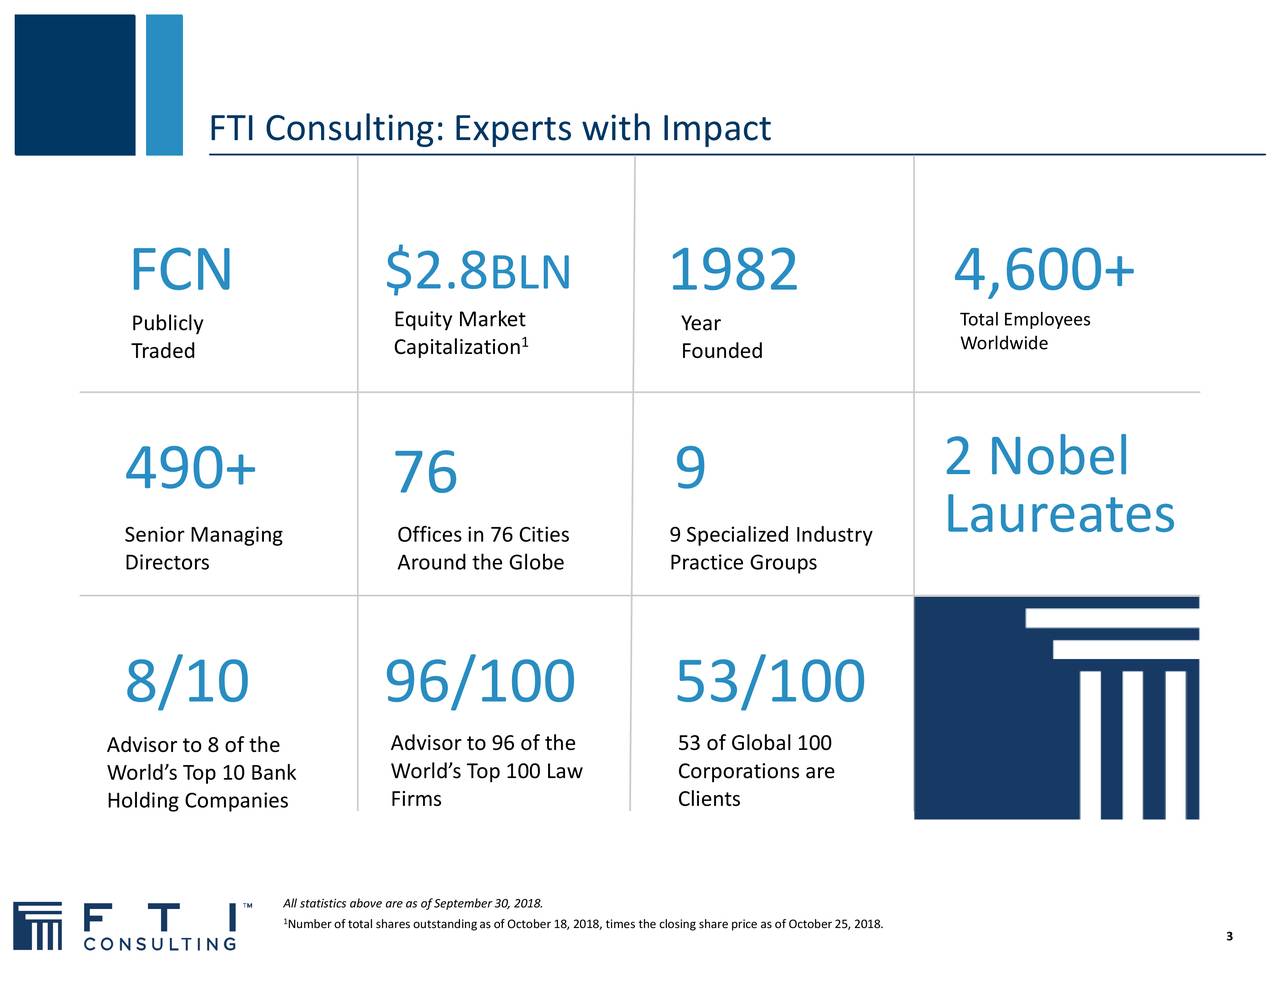 FTI Consulting (FCN) Presents At Bank of America Merrill Lynch